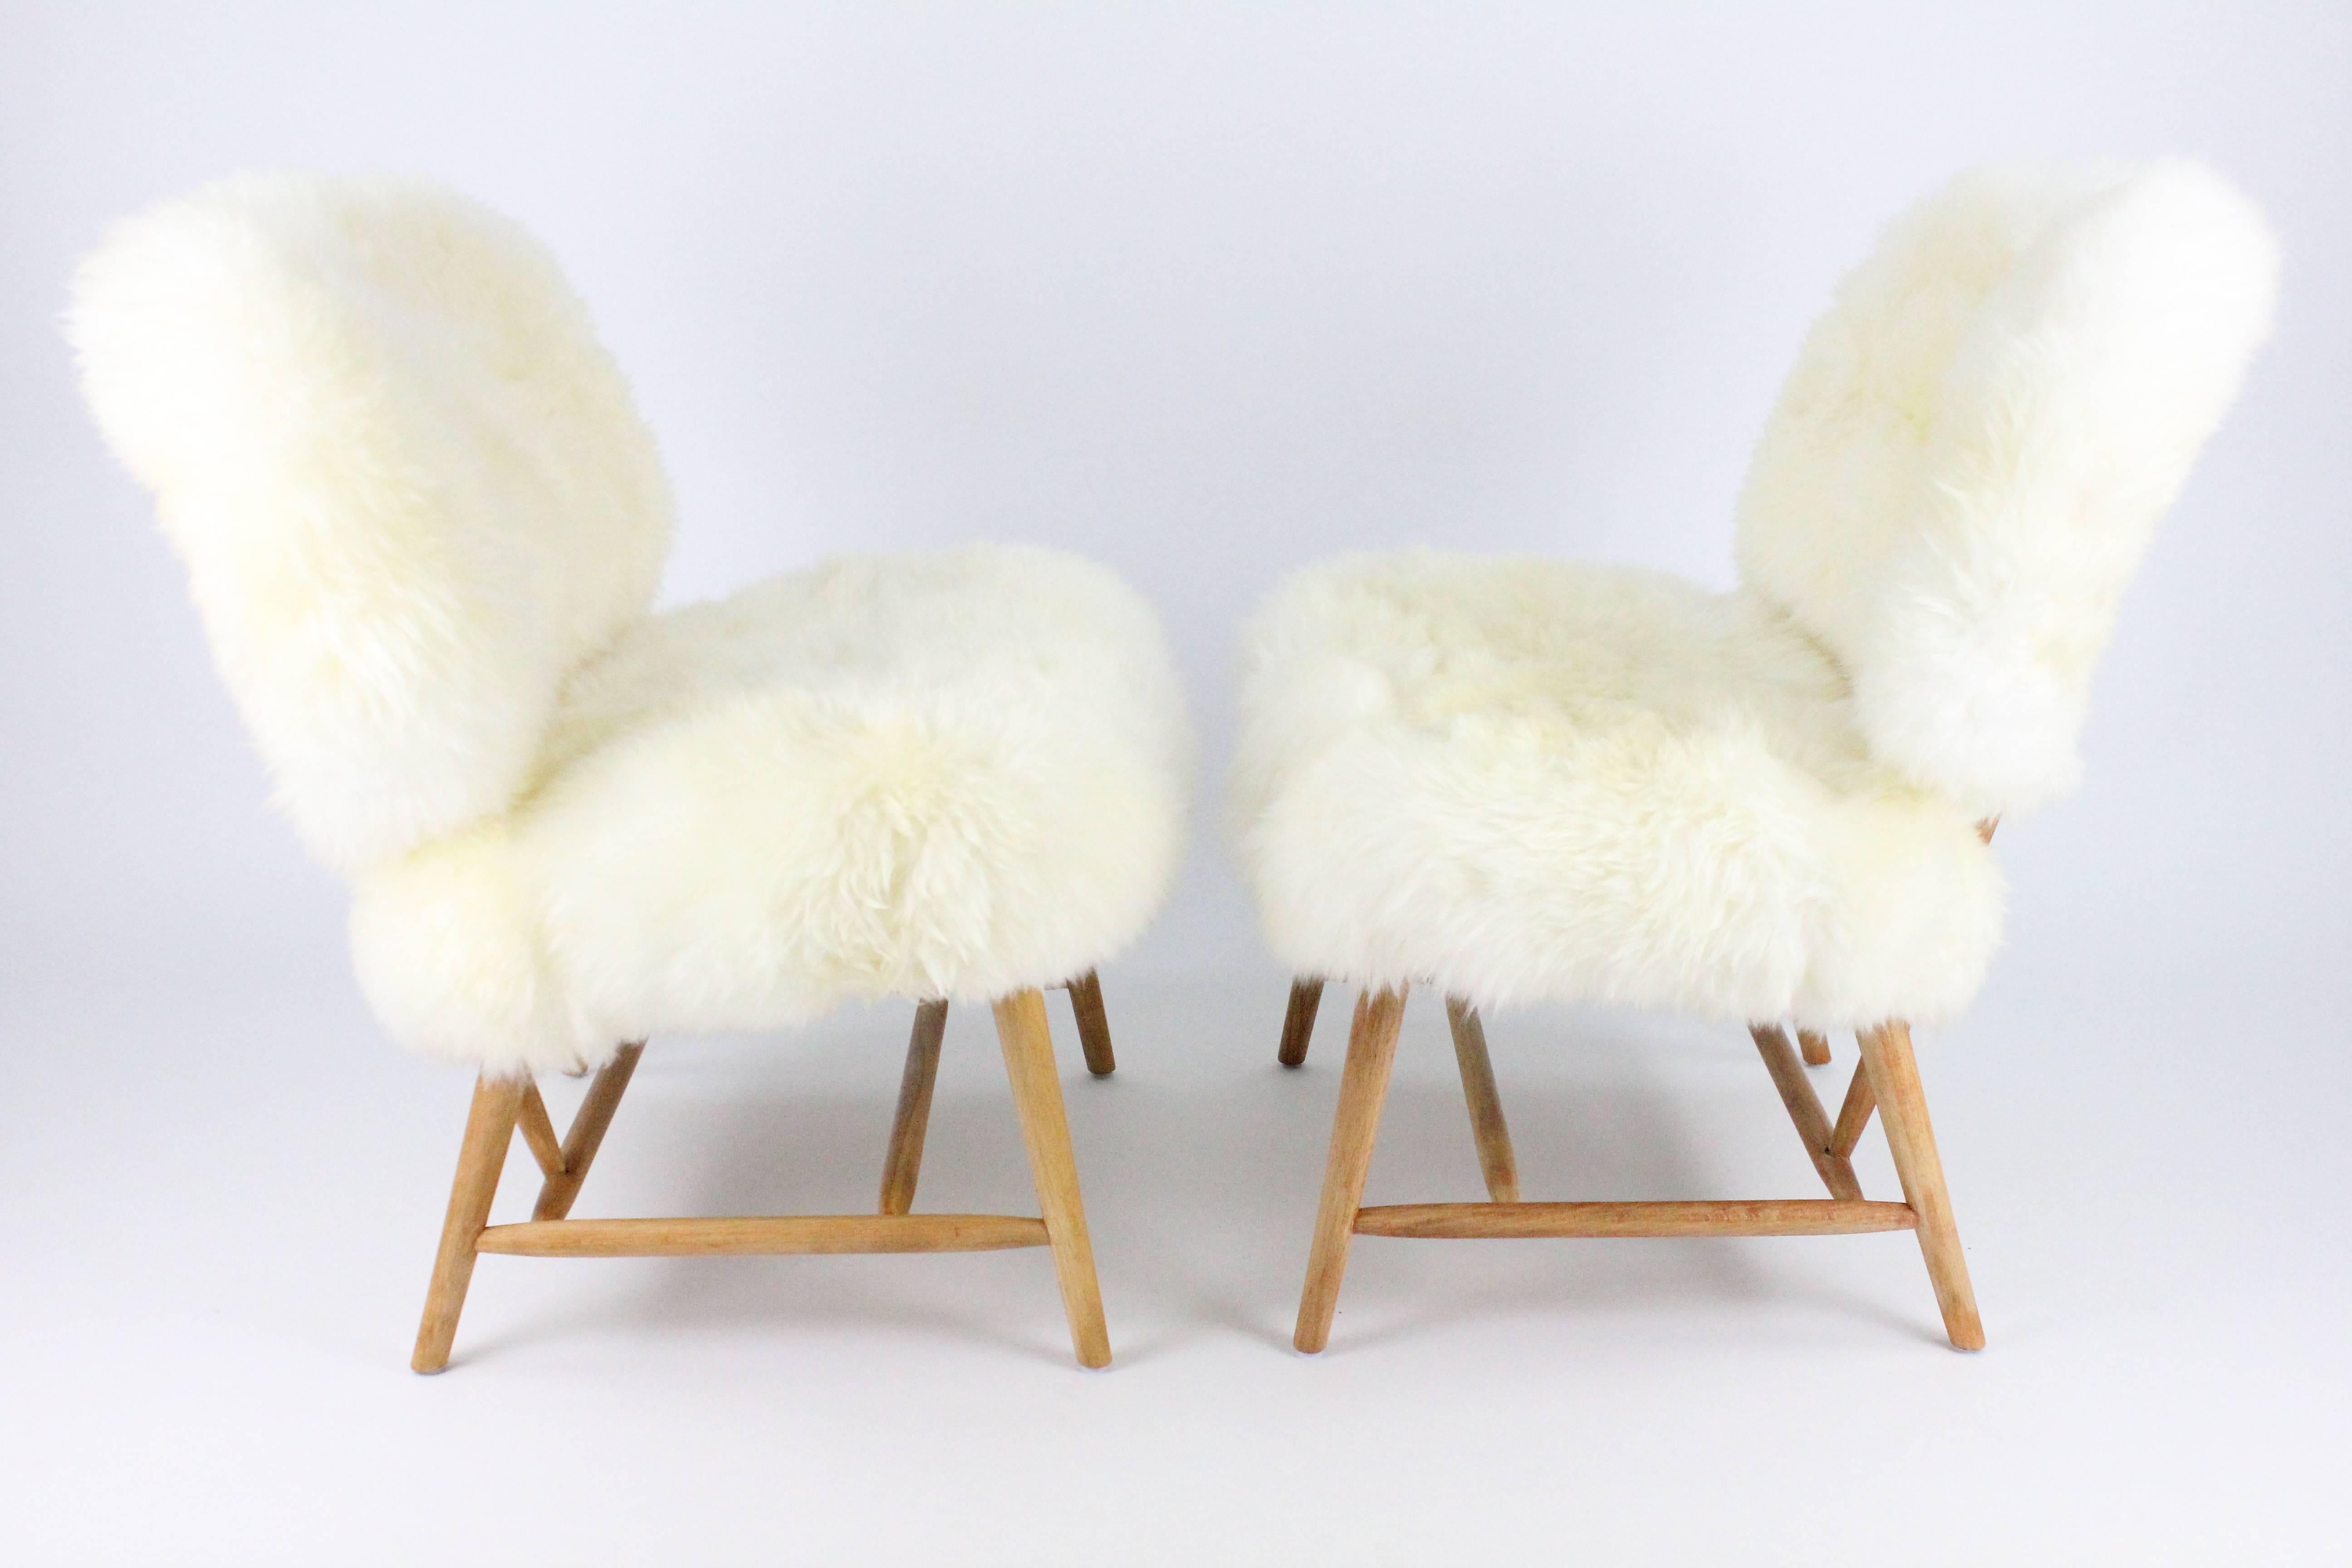 A wonderful pair of Teve easy chairs upholstered in Sheepskin. Designed by Alf Svensson in 1953. Manufactured by Ljungs Industrier for DUX. The frame is in oiled beech and they are recently upholstered in off-white long hair sheepskin. Very nice